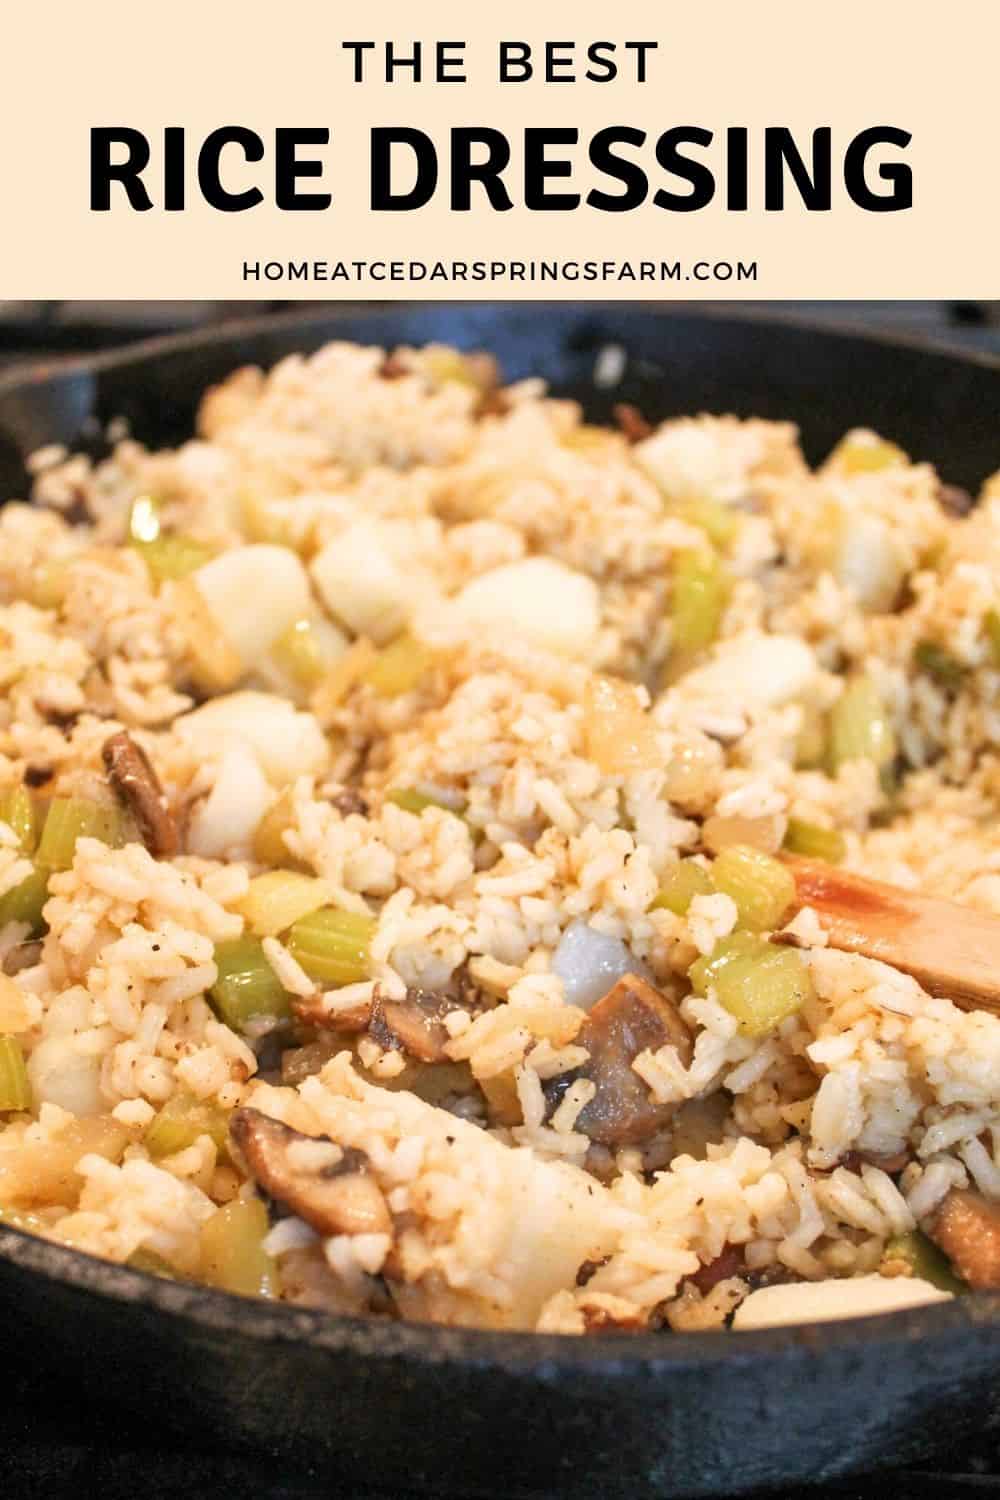 Rice dressing in a cast iron skillet with text overlay.